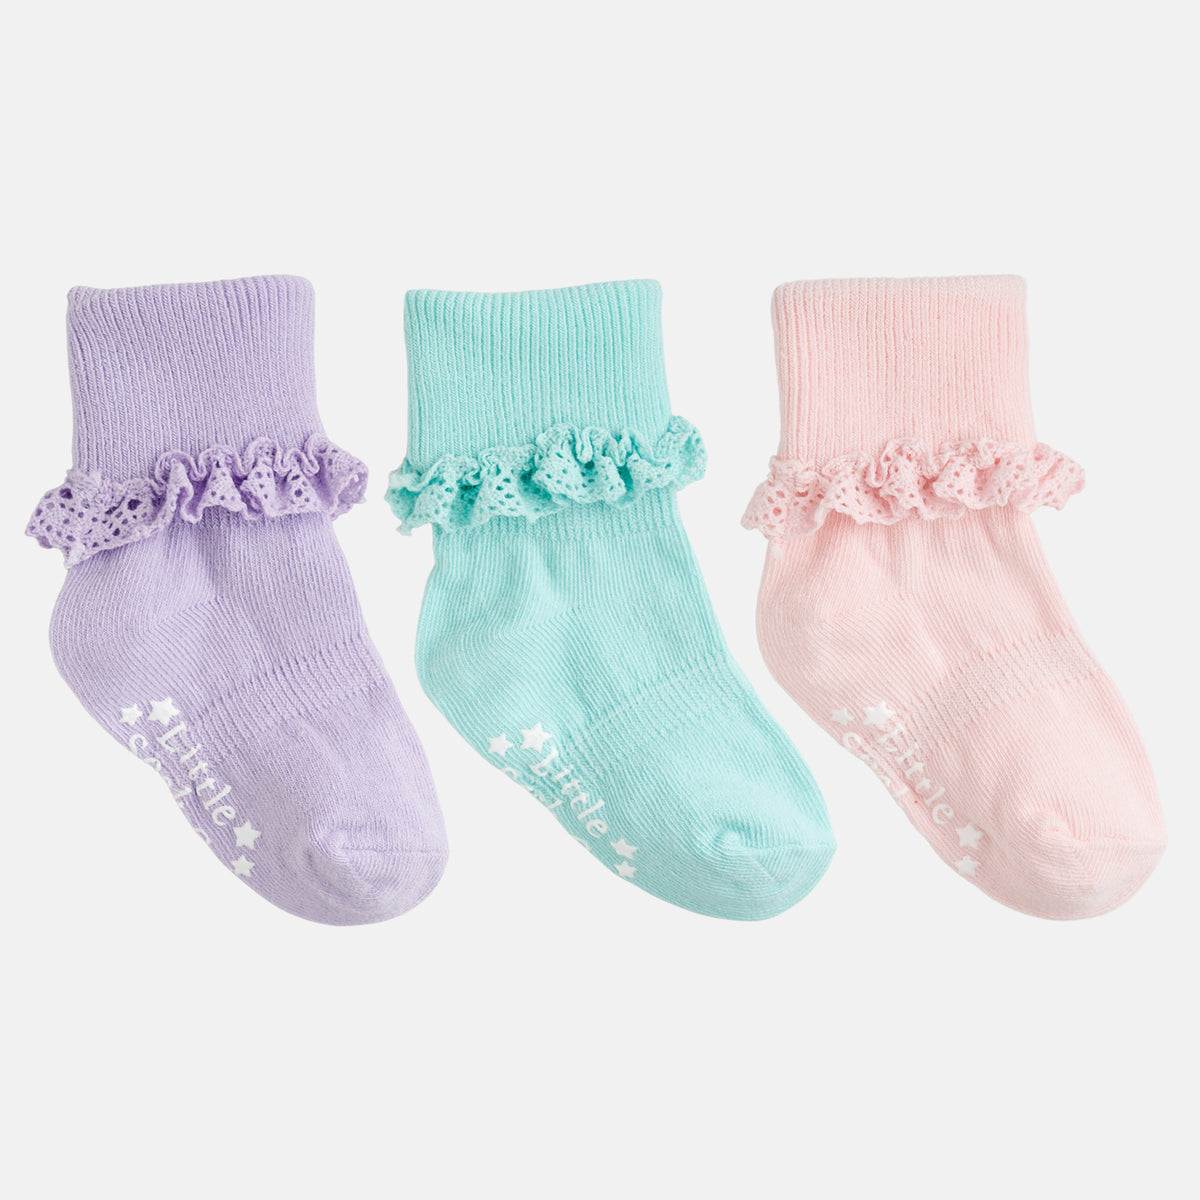 Frilly Non-Slip Stay-On Baby and Toddler Socks - 3 Pack in Pink Lemonade, Paradiso and Amethyst